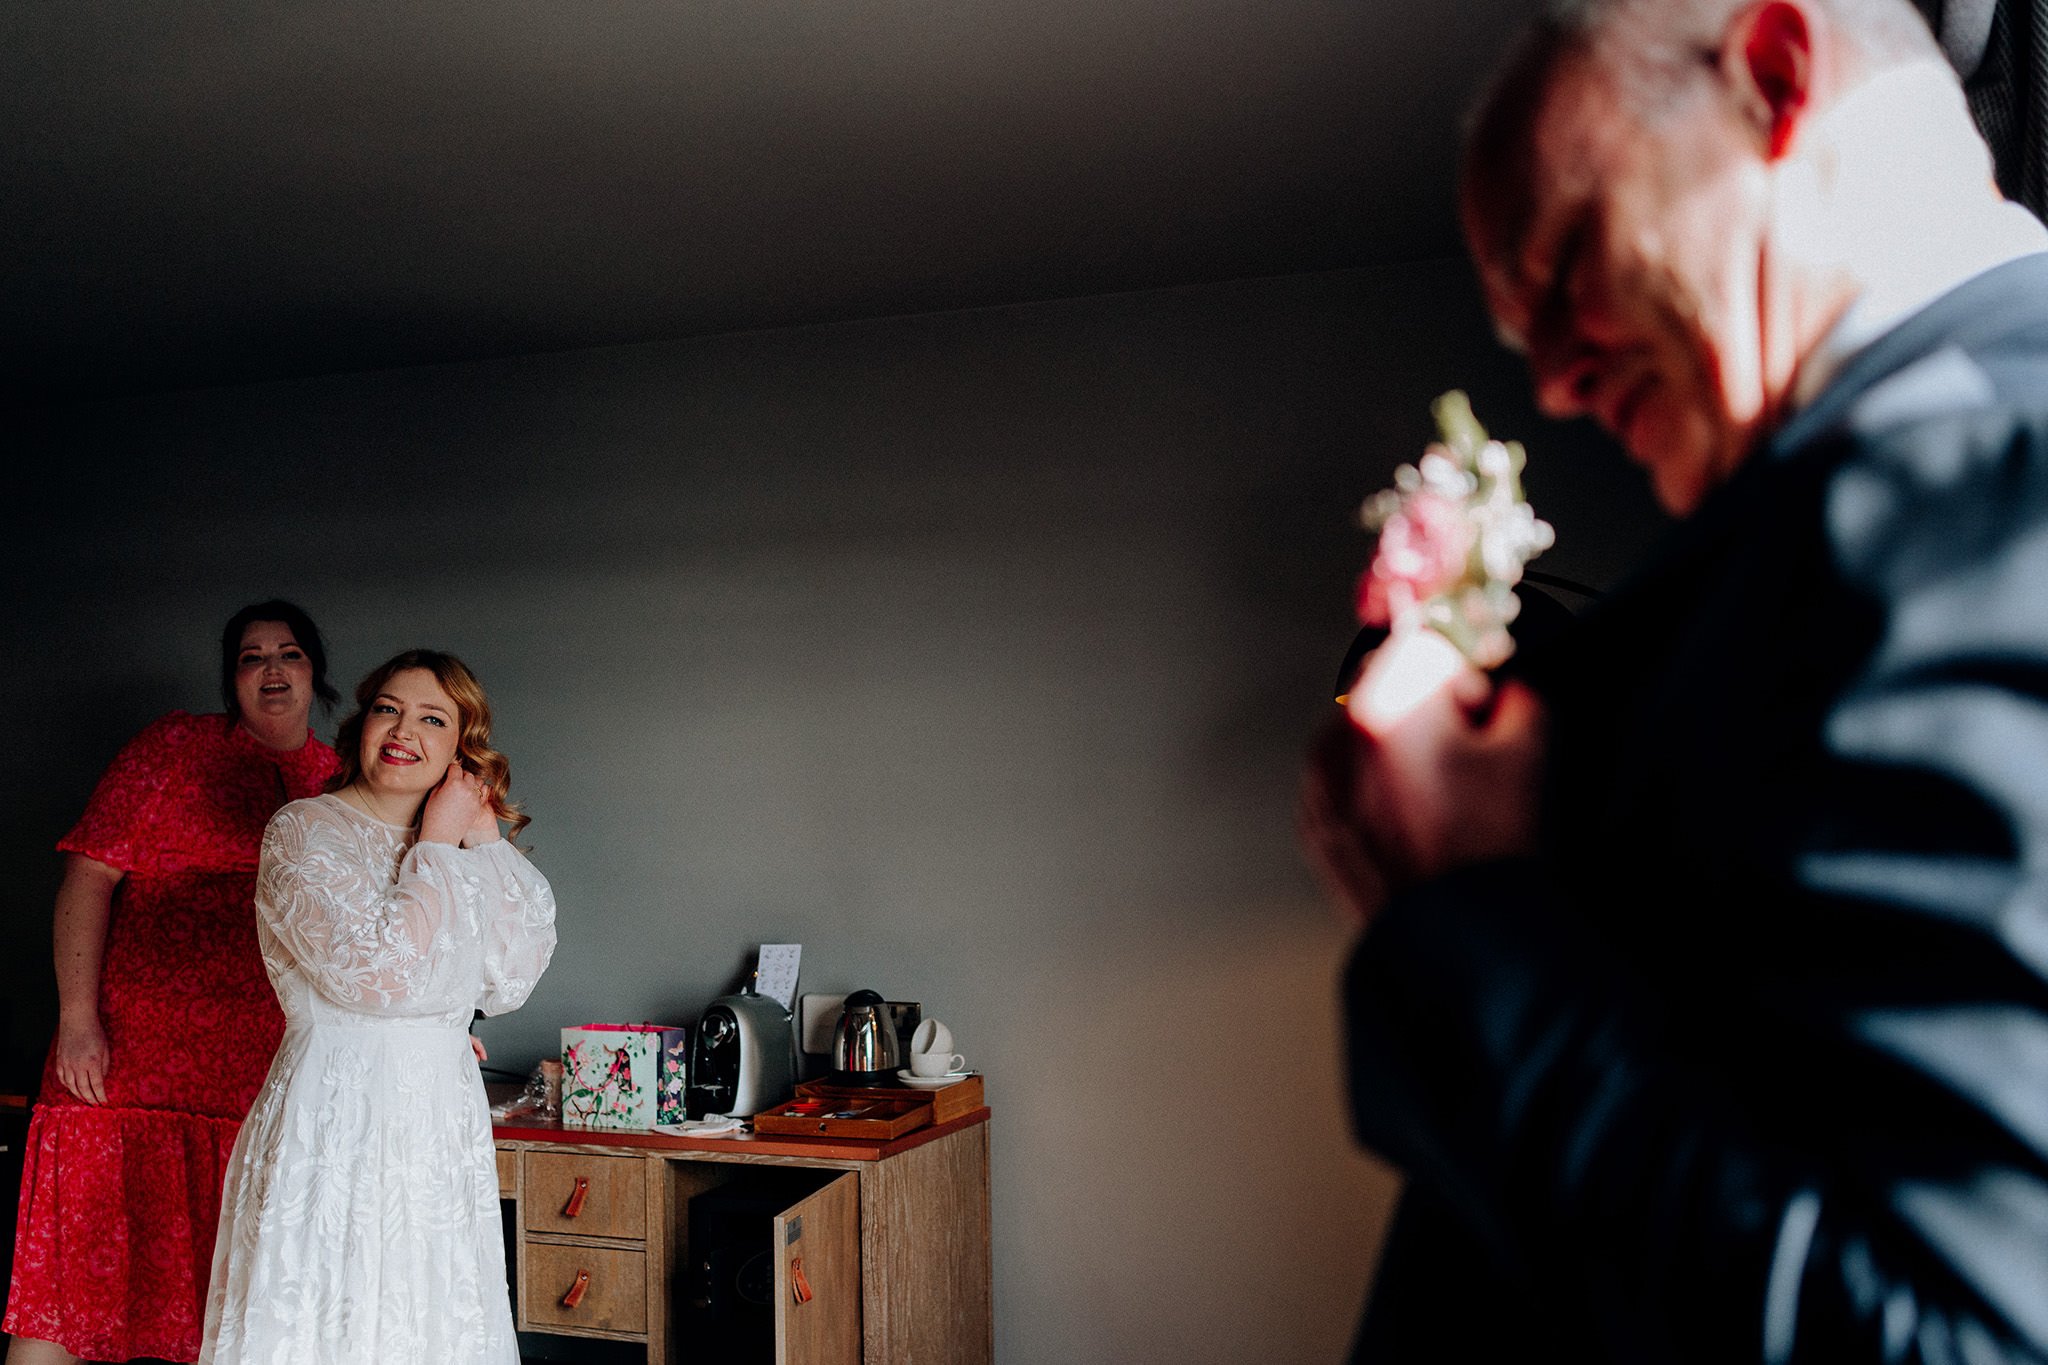 Daughter watching her dad fit flower on her wedding day